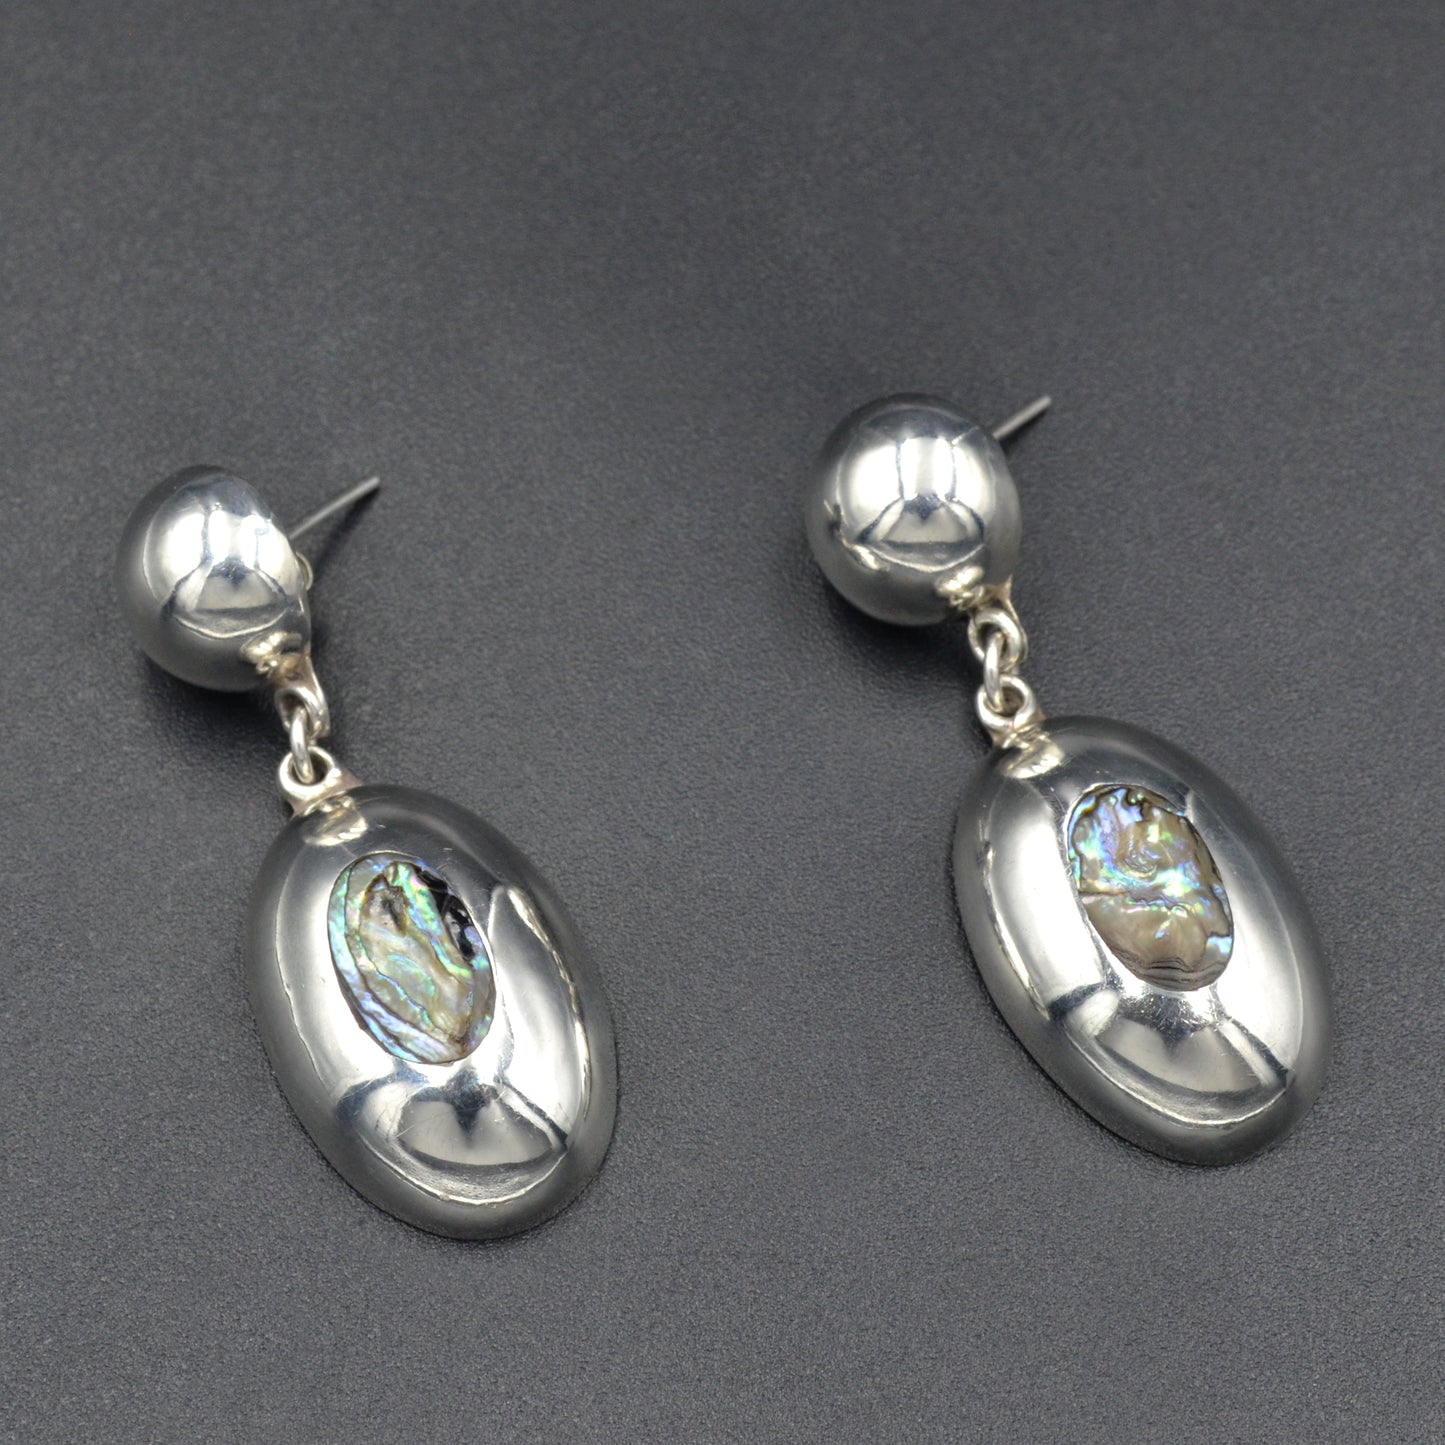 Vintage sterling silver and abalone shell drop earrings